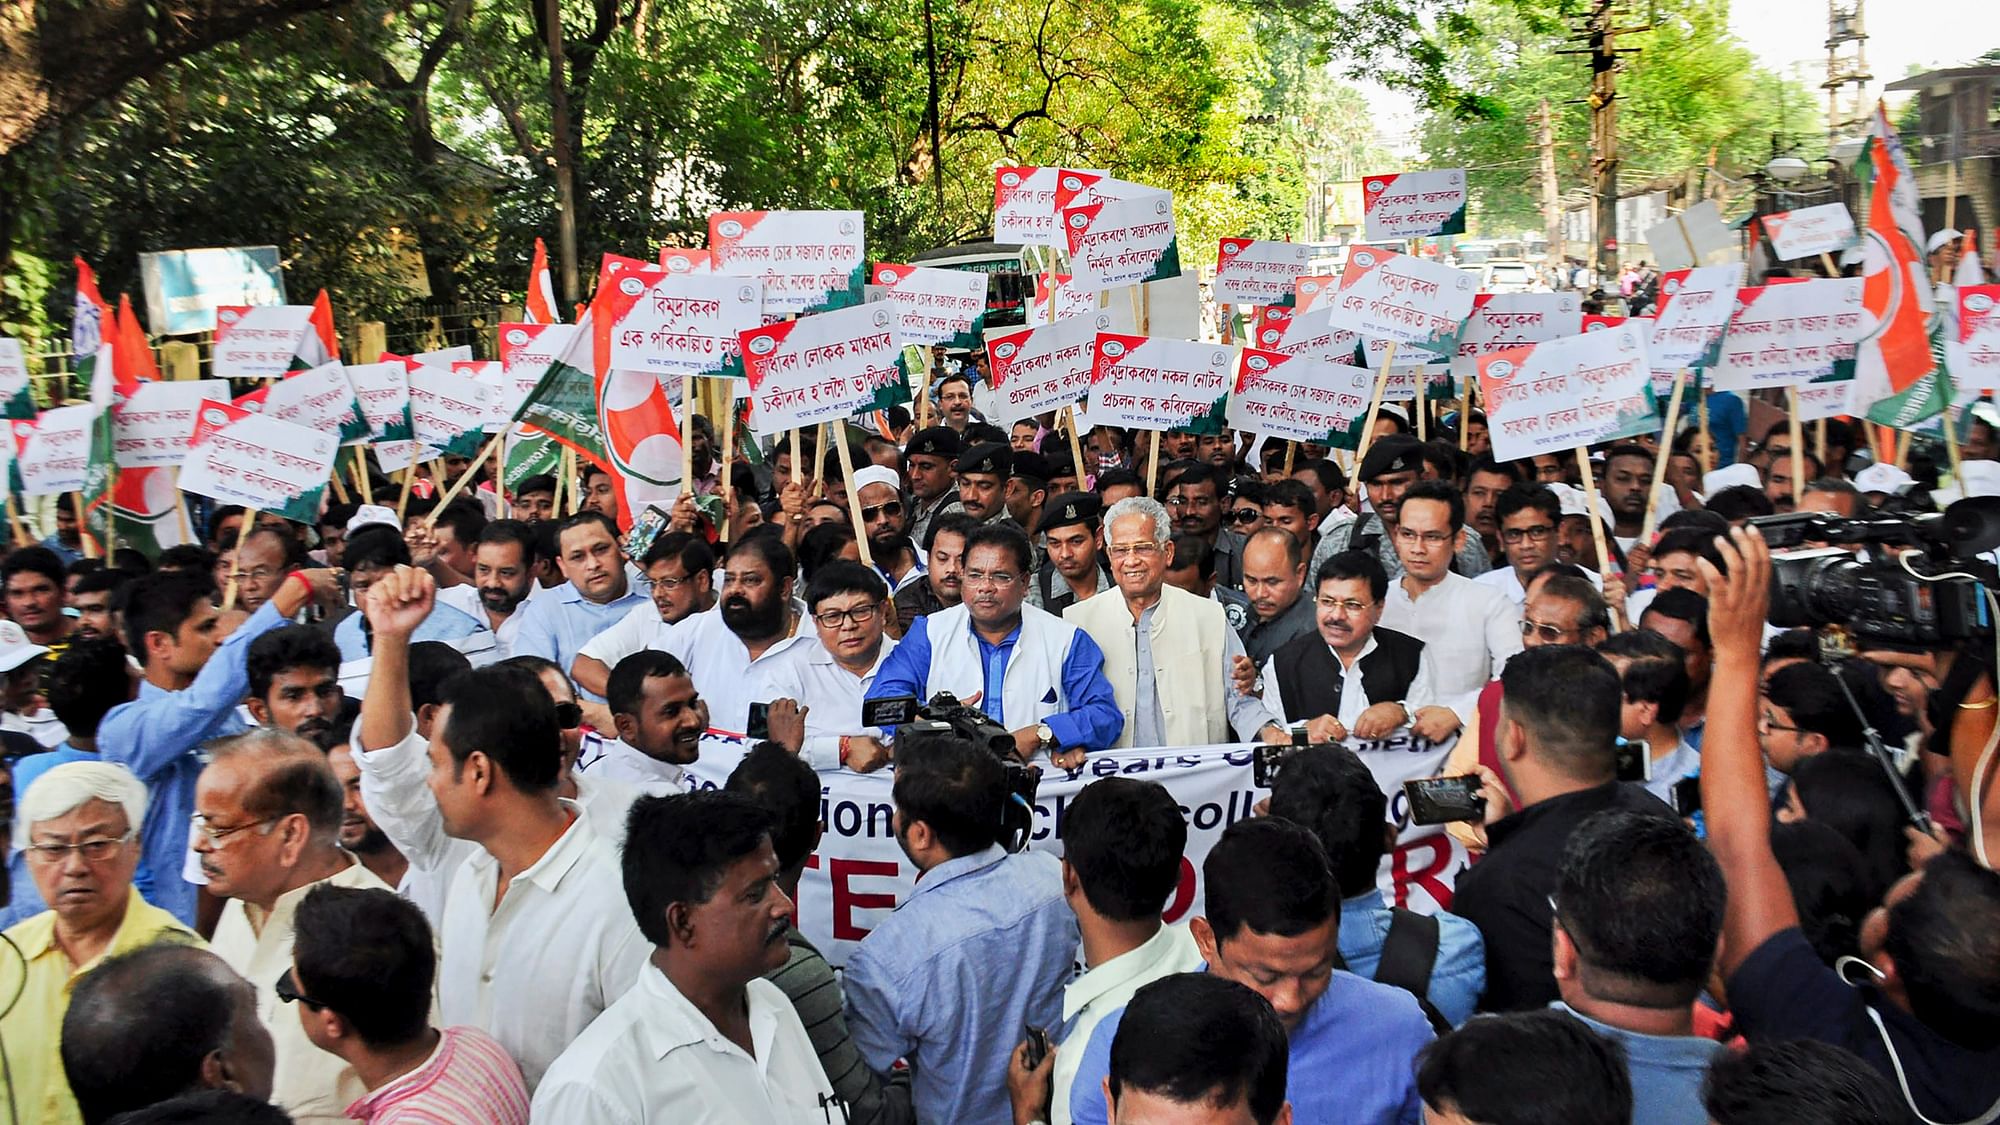  Former Assam Chief Minister Tarun Gogoi and others take part in a protest rally on the second anniversary of demonetisation in Guwahati.&nbsp;